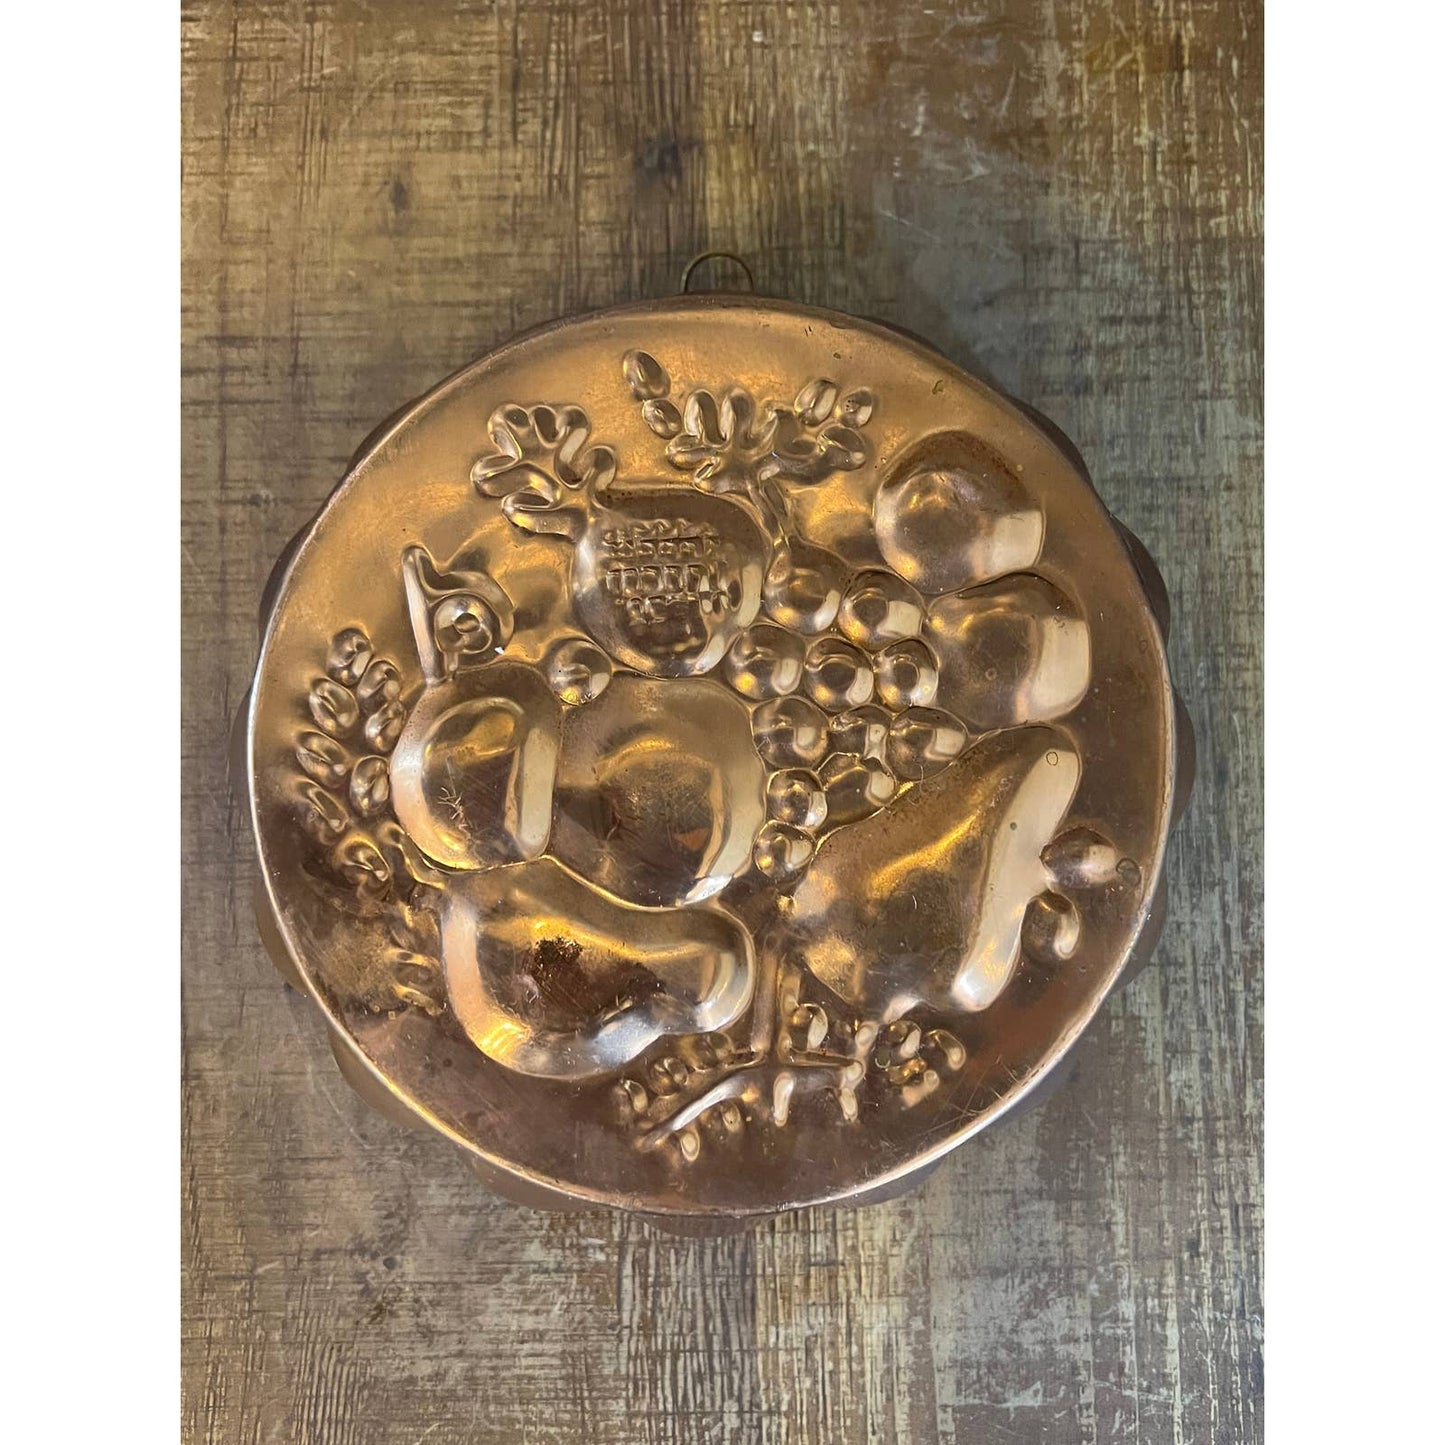 Vintage round copper and brass fruit mold